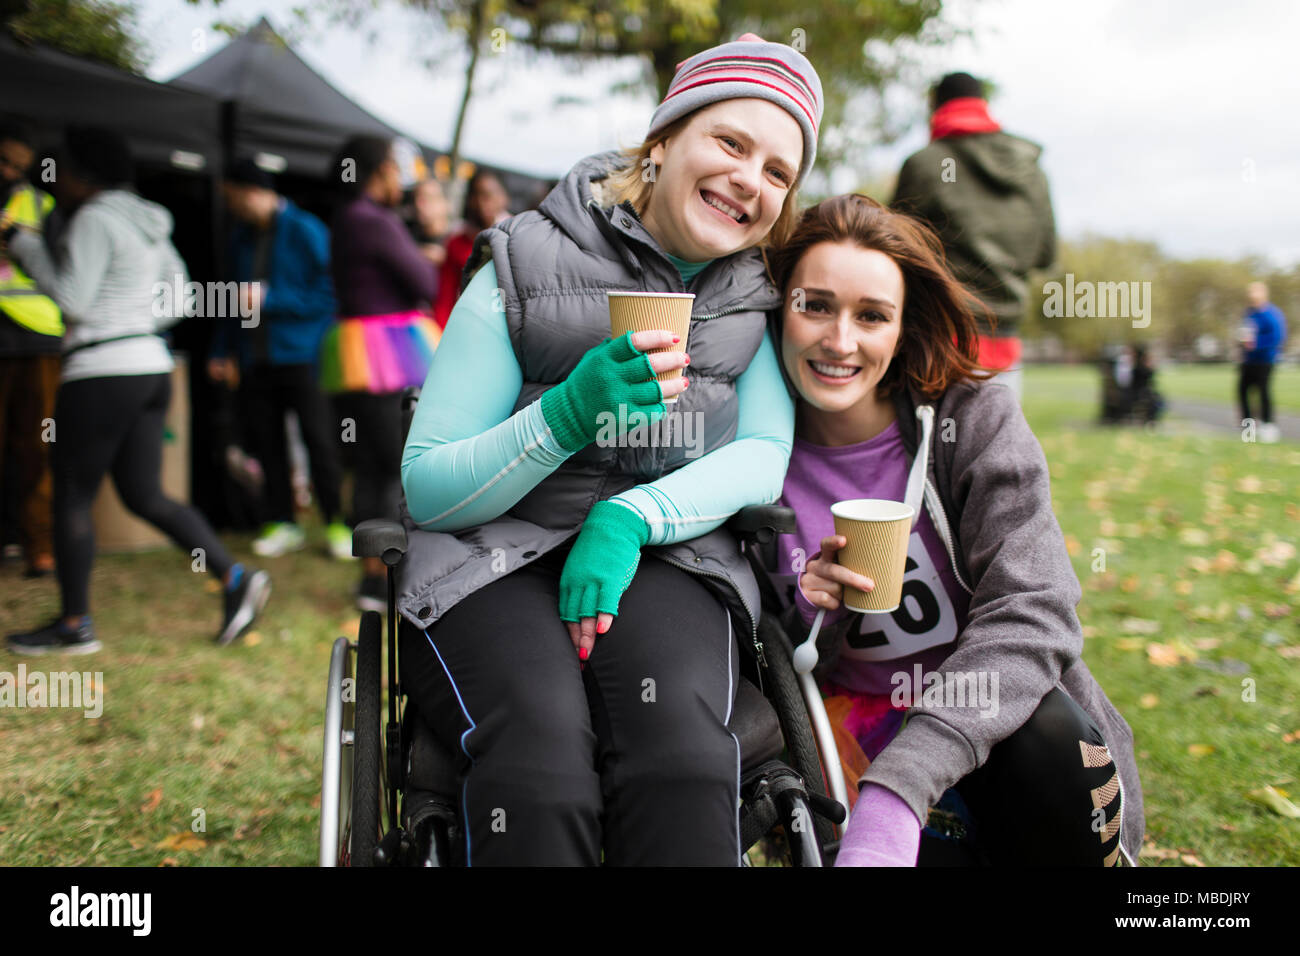 Portrait smiling woman in wheelchair with friend, drinking water at charity race in park Stock Photo